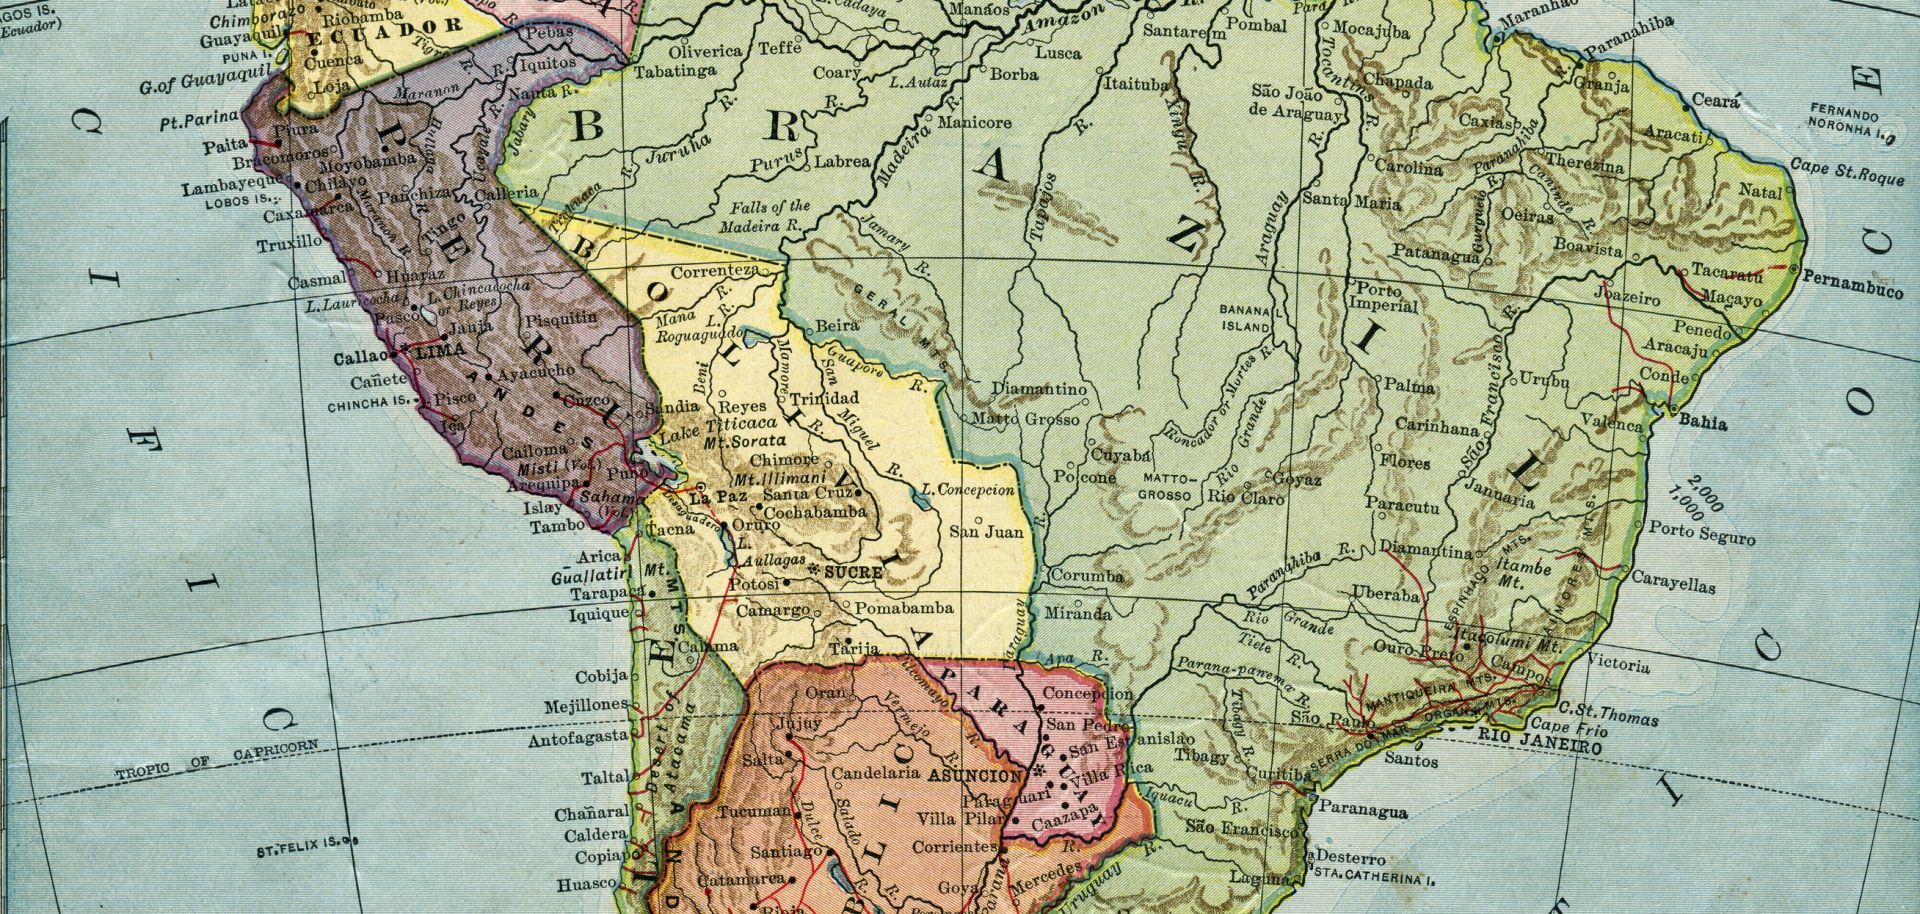 A territorial dispute remaining from the 19th century War of the Pacific continues to sour relations between Bolivia and Chile.